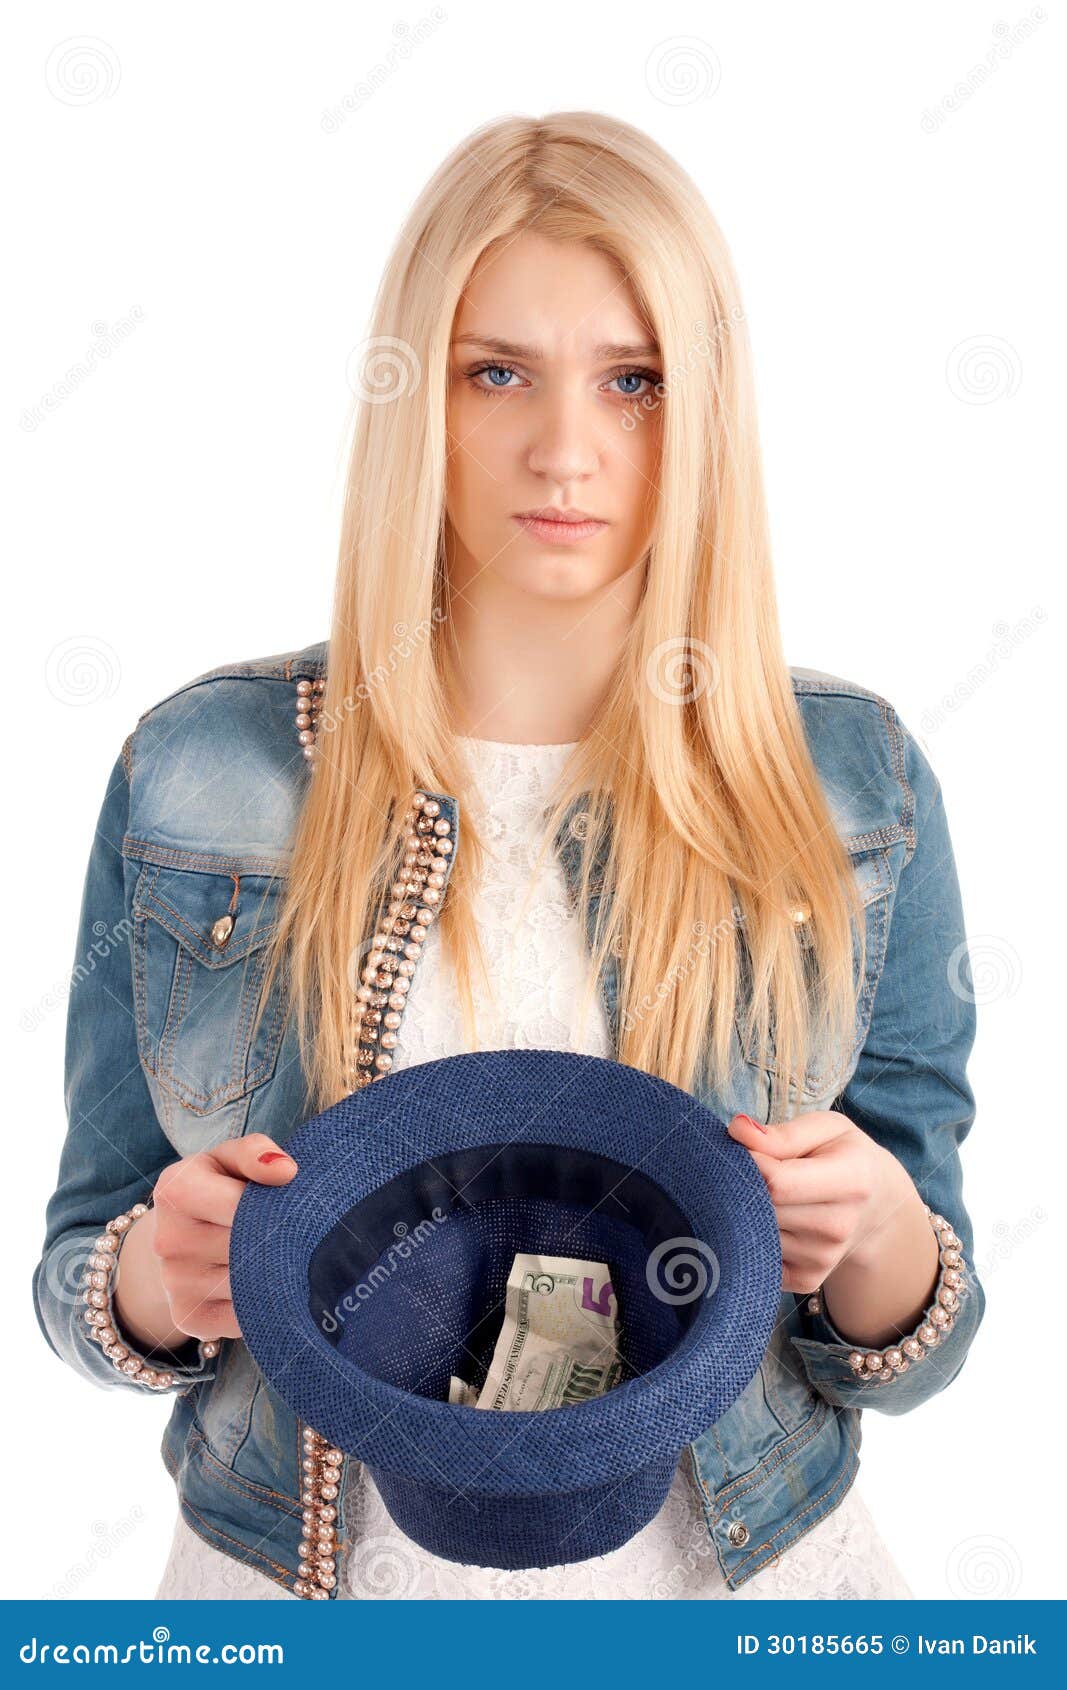 young-woman-hat-begging-money-studio-shot-over-white-background-30185665.jpg